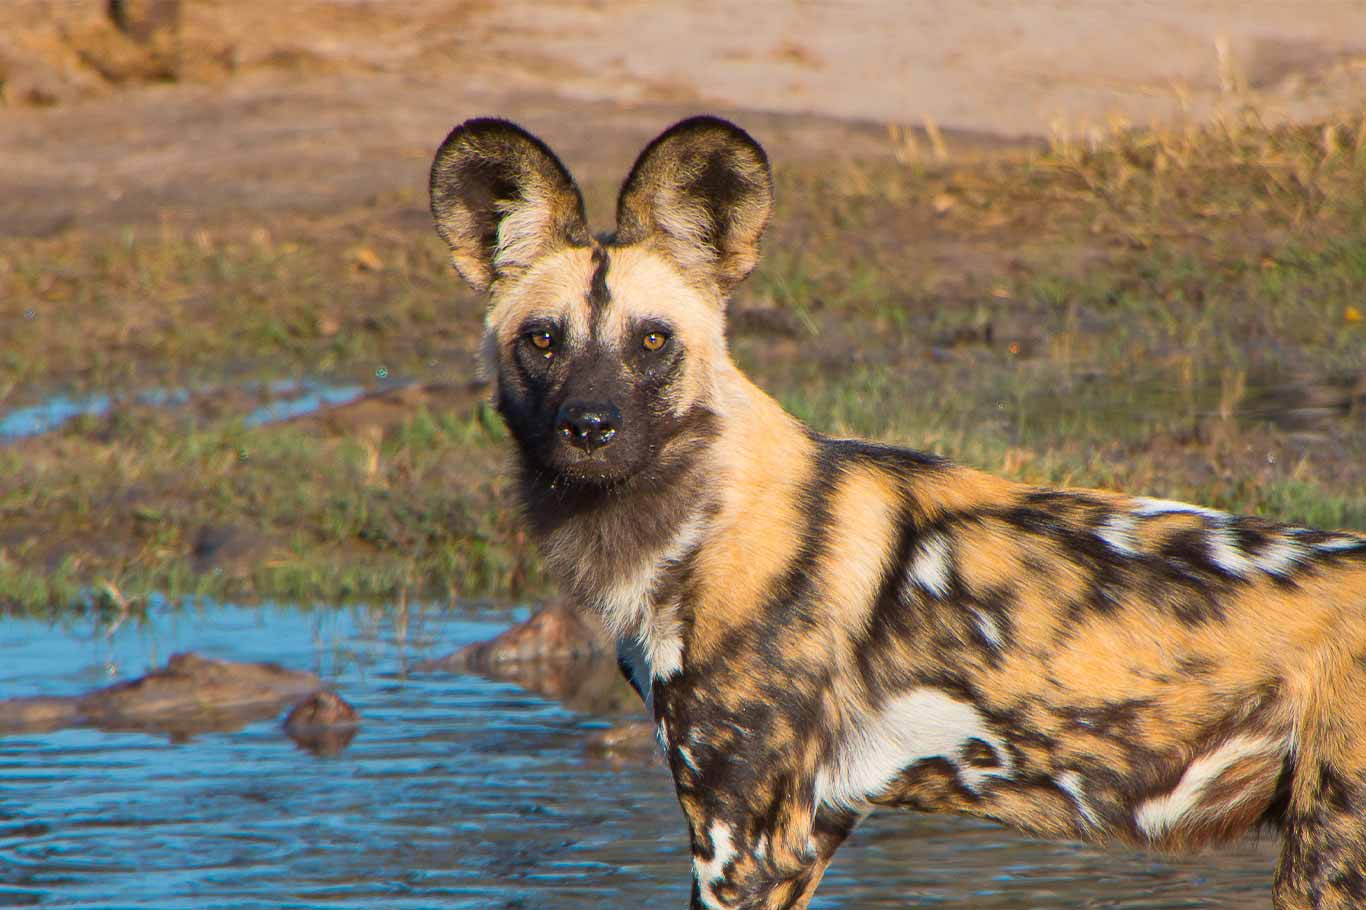 Beautiful Painted Dogs In Grave Danger!